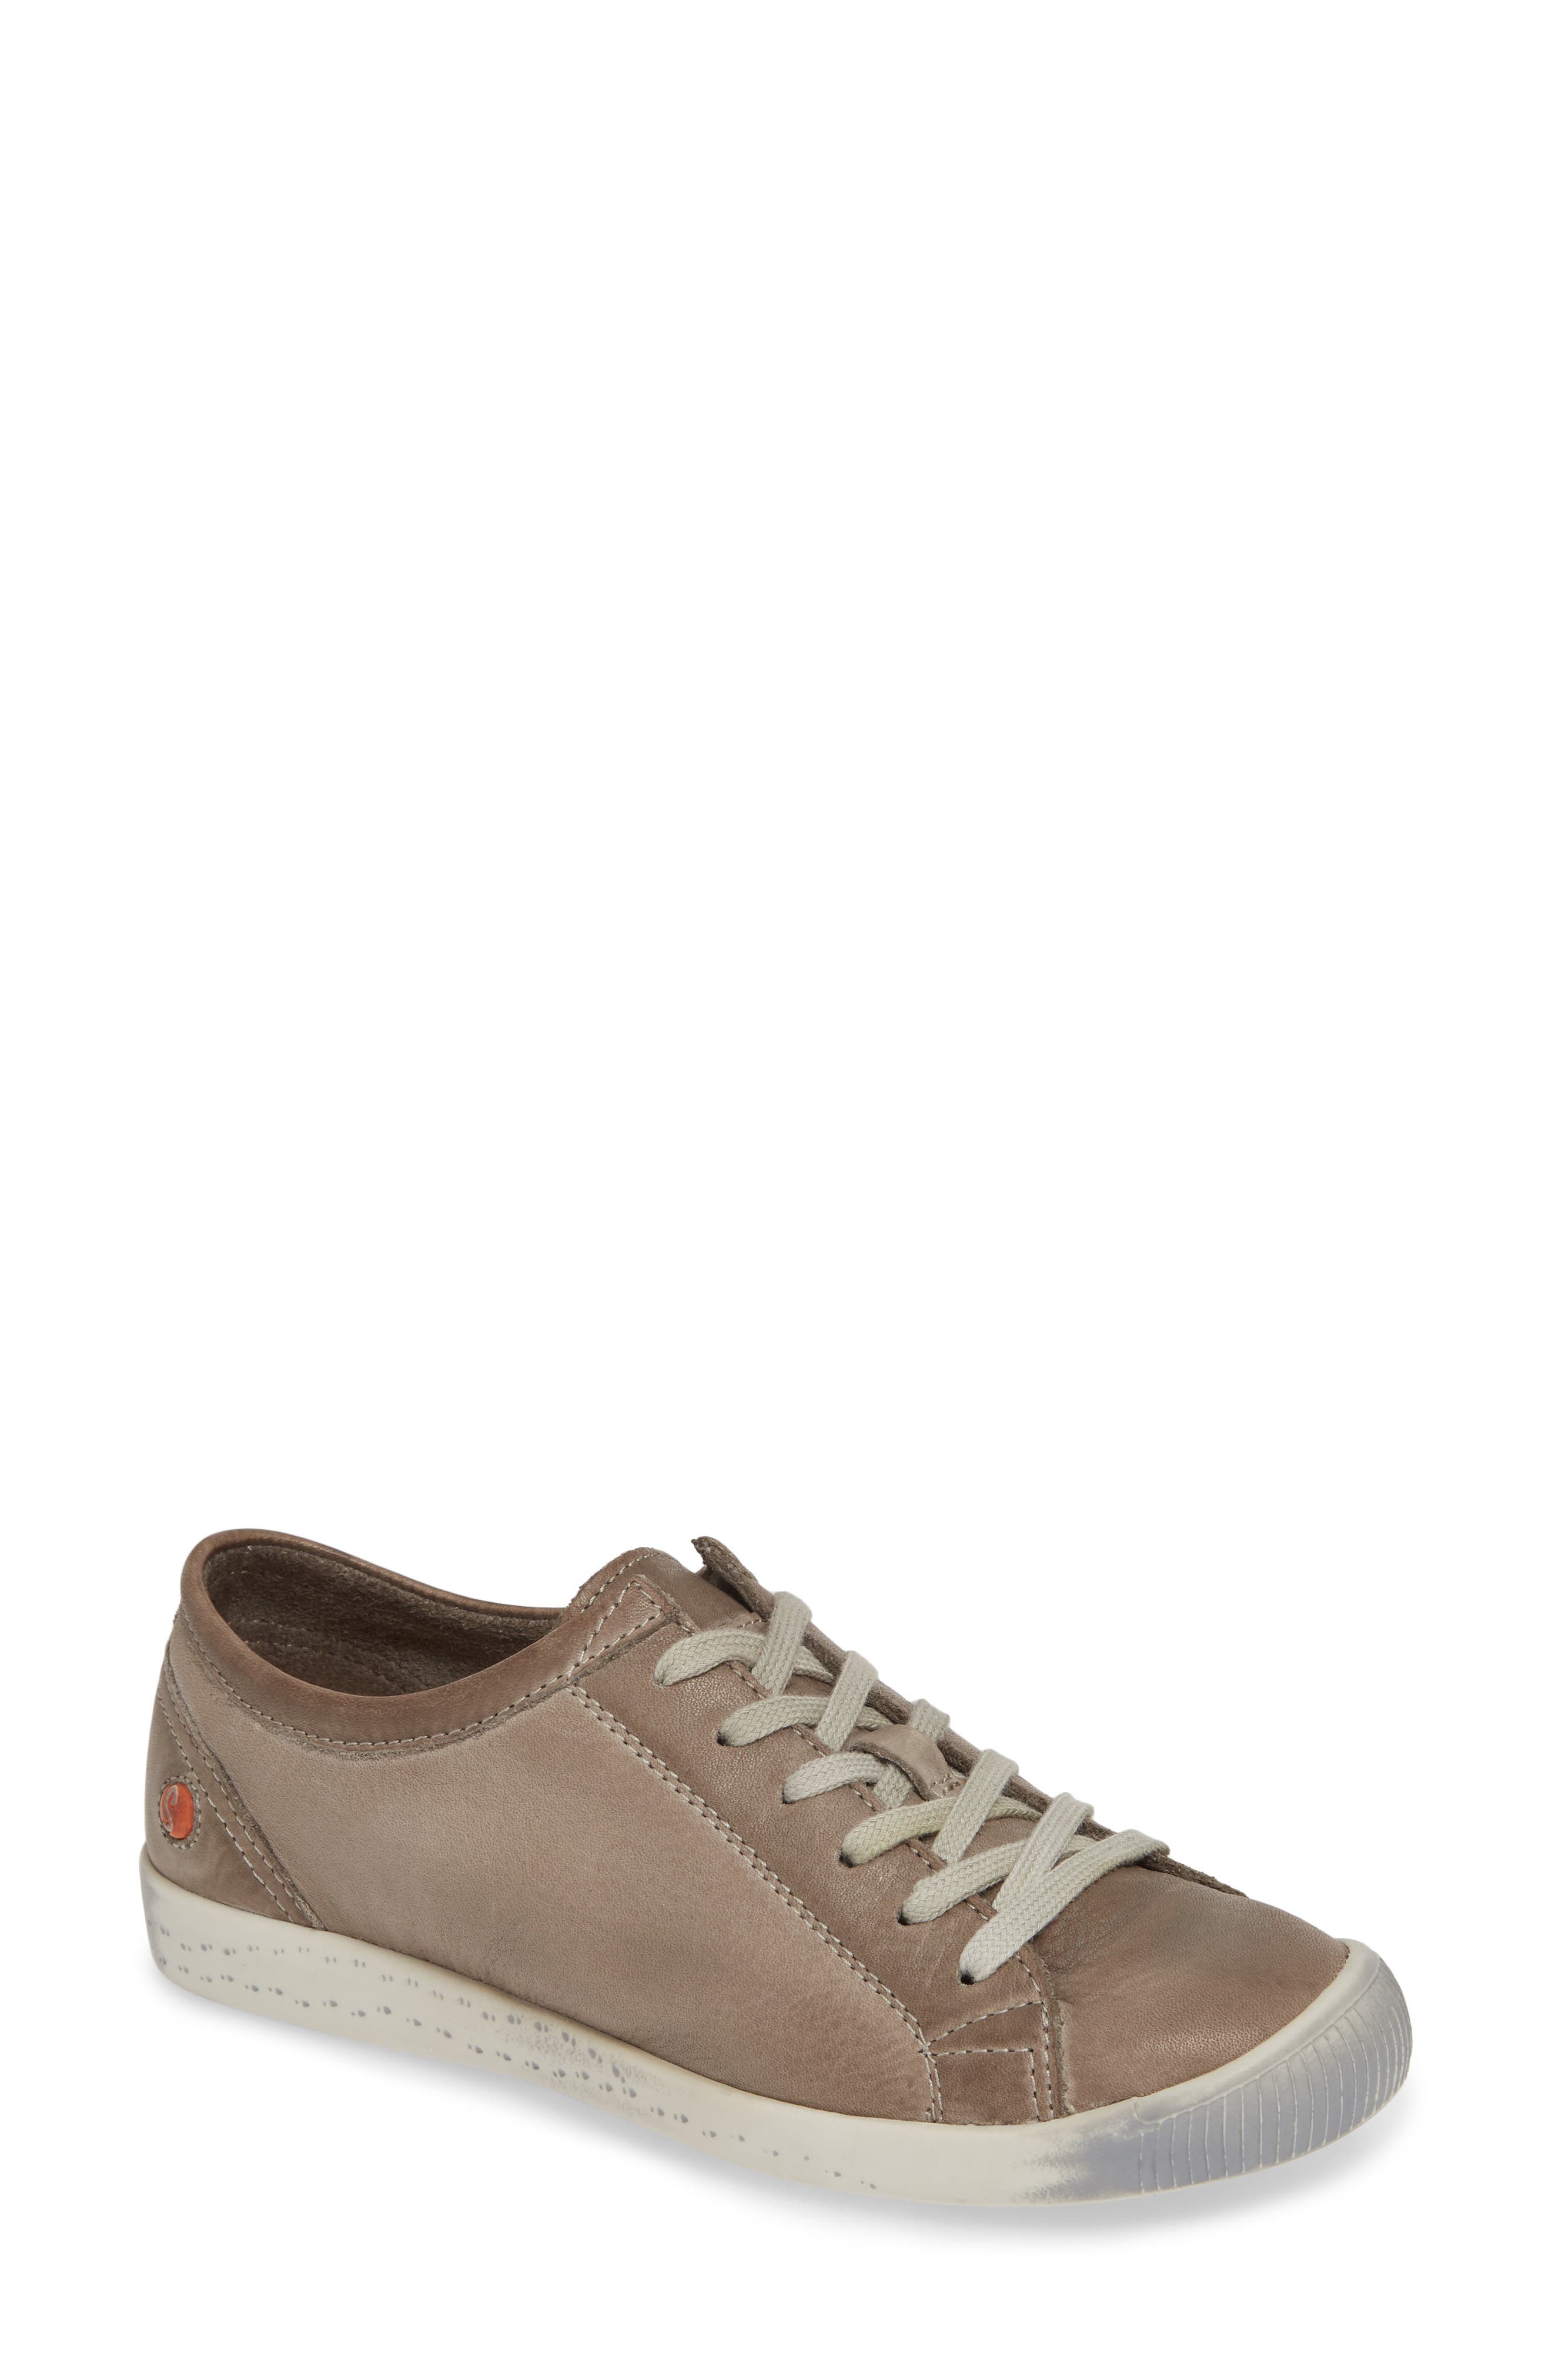 SOFTINOS BY FLY LONDON ISLA DISTRESSED SNEAKER,5601360467066